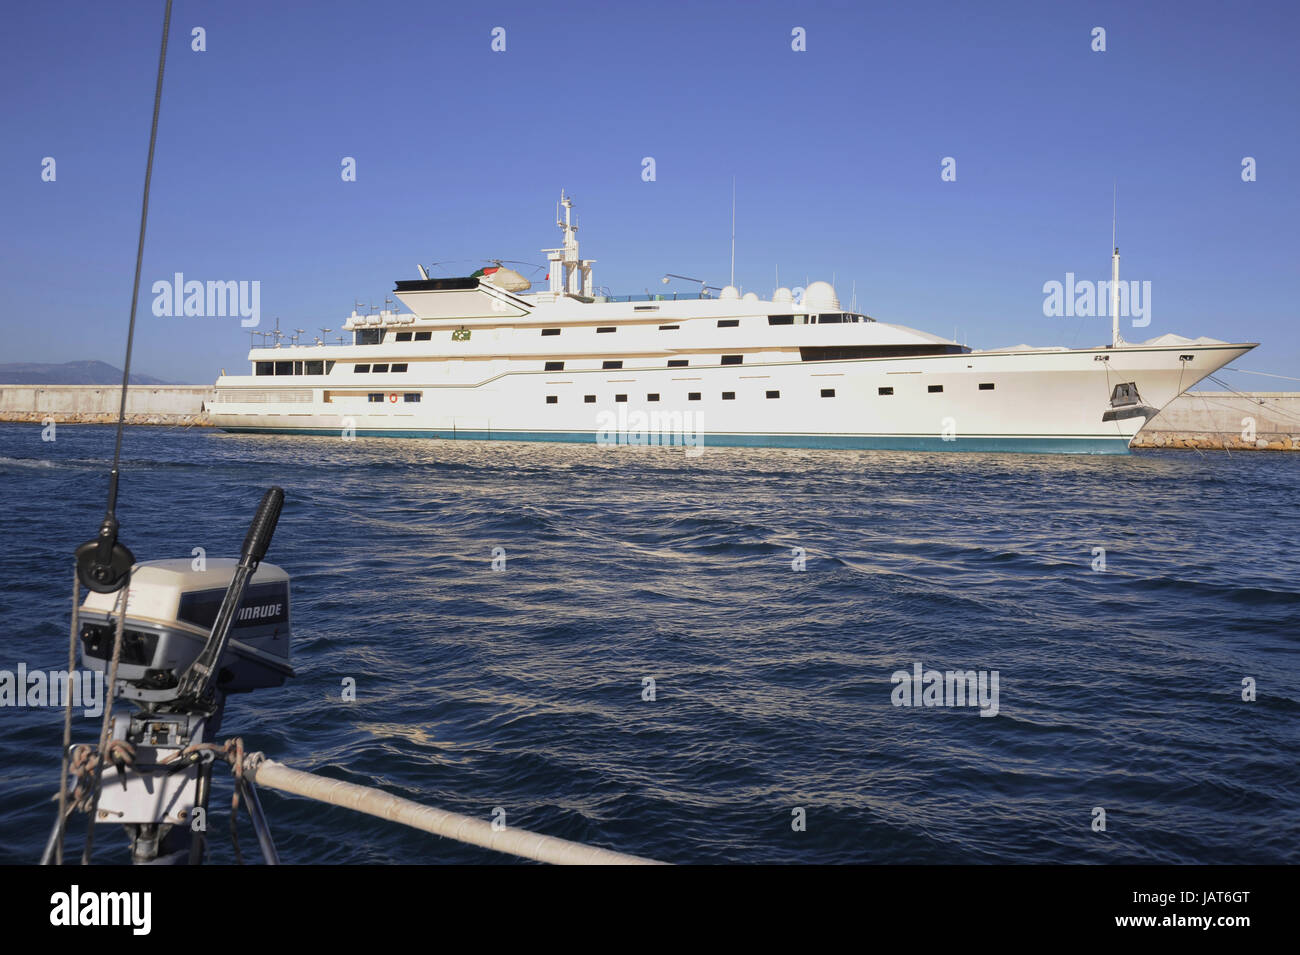 the Nabila yacht, formerly property of Saudi billionaire Adnan Kashoggi, resold in 1989 to Donald Trump who changed its name to Trump Princess, last owner known the Saudi emir Al-Walid bin Talal; built by Benetti shipyard in Viareggio in 1980, was then the largest private yacht in the world. Stock Photo